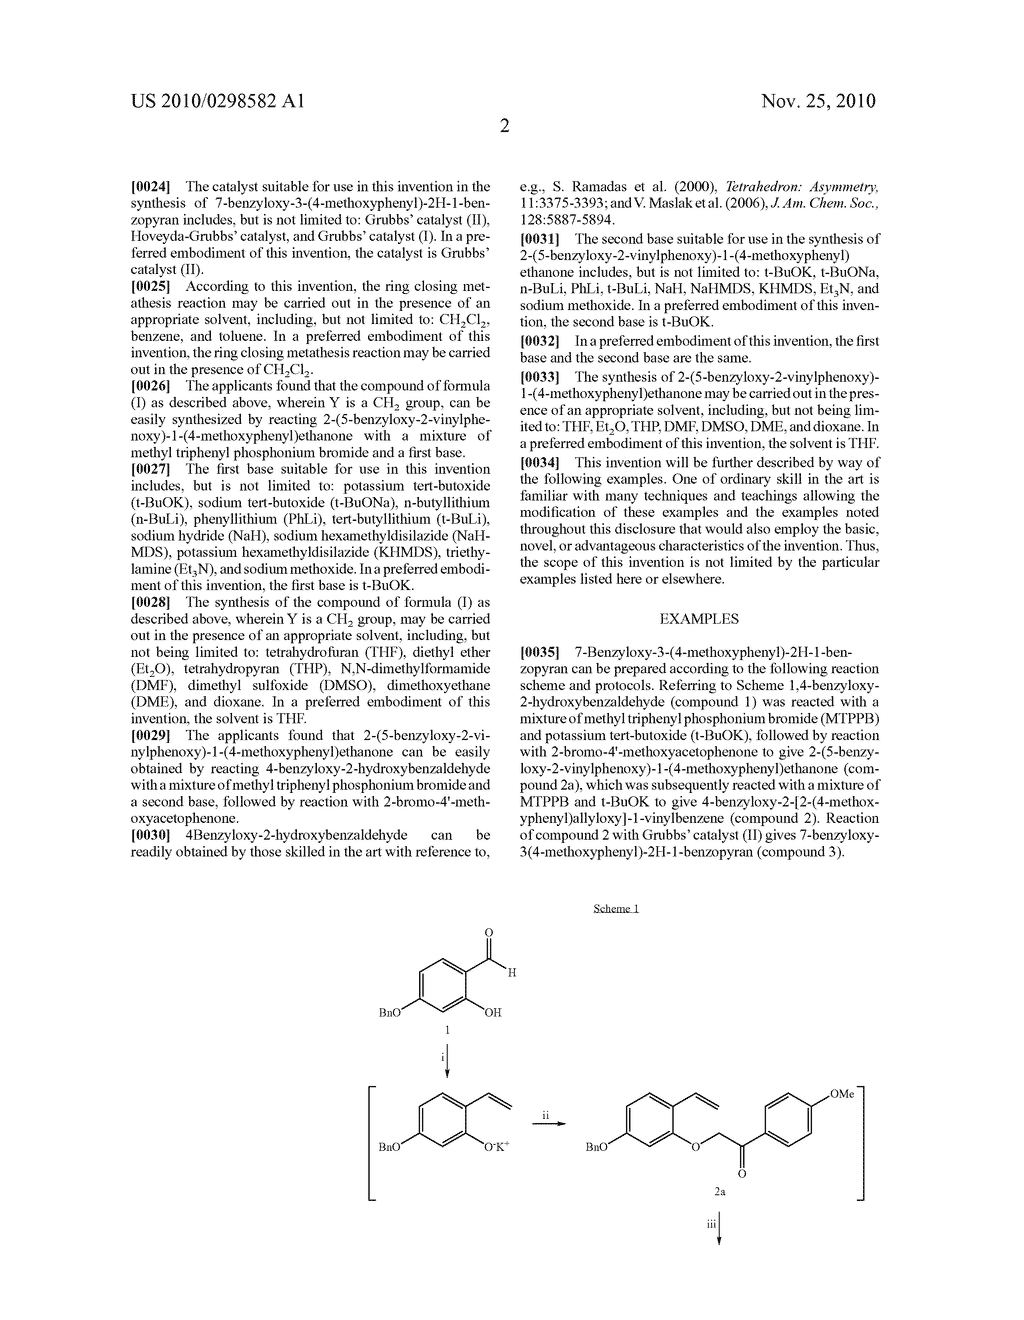 Intermediate Compounds and Processes for the Preparation of 7-benzyloxy-3-(4-methoxyphenyl)-2H-1-benzopyran - diagram, schematic, and image 03